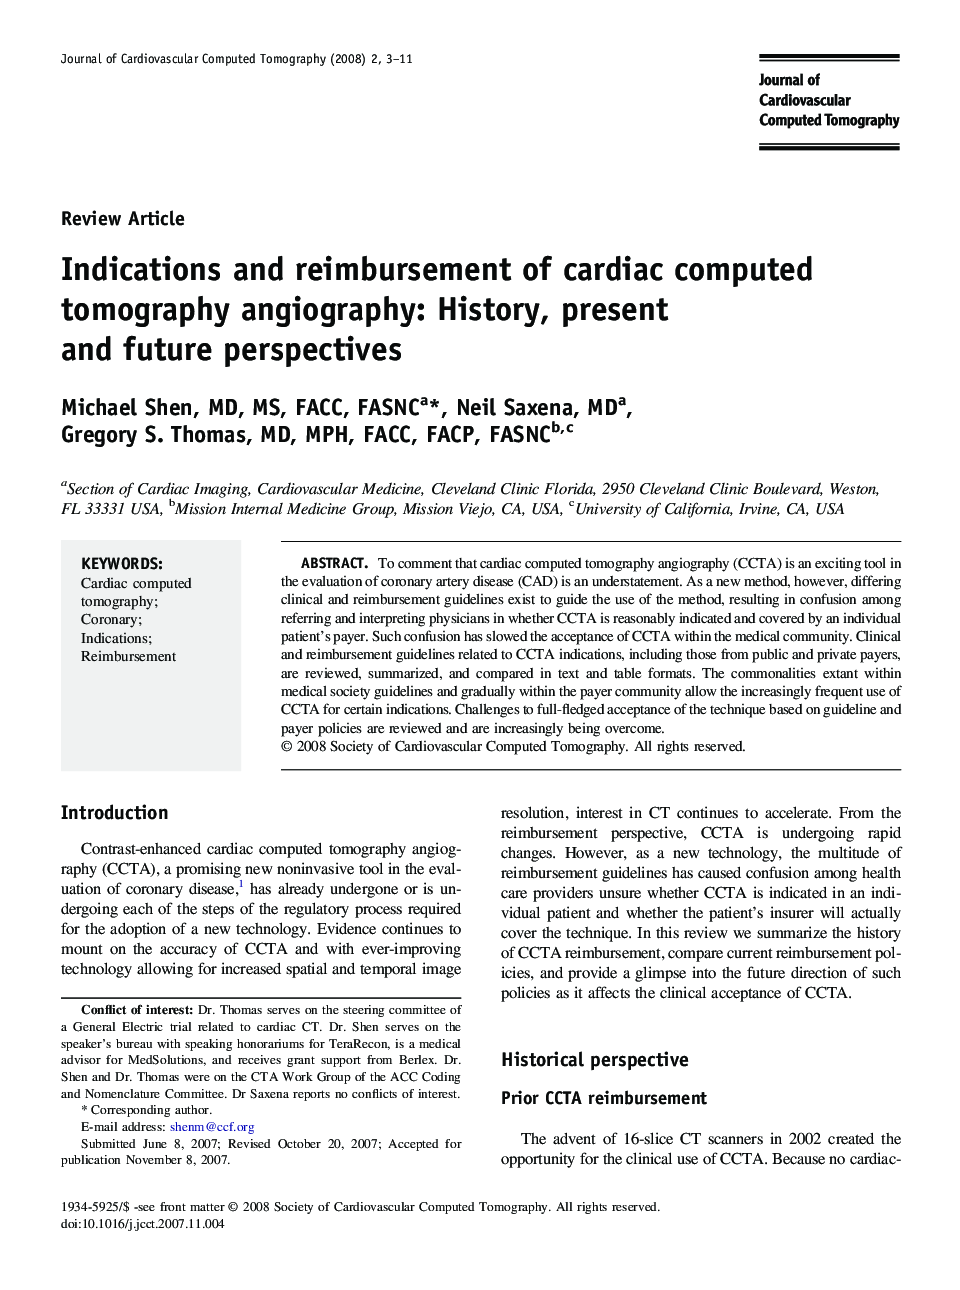 Indications and reimbursement of cardiac computed tomography angiography: History, present and future perspectives 